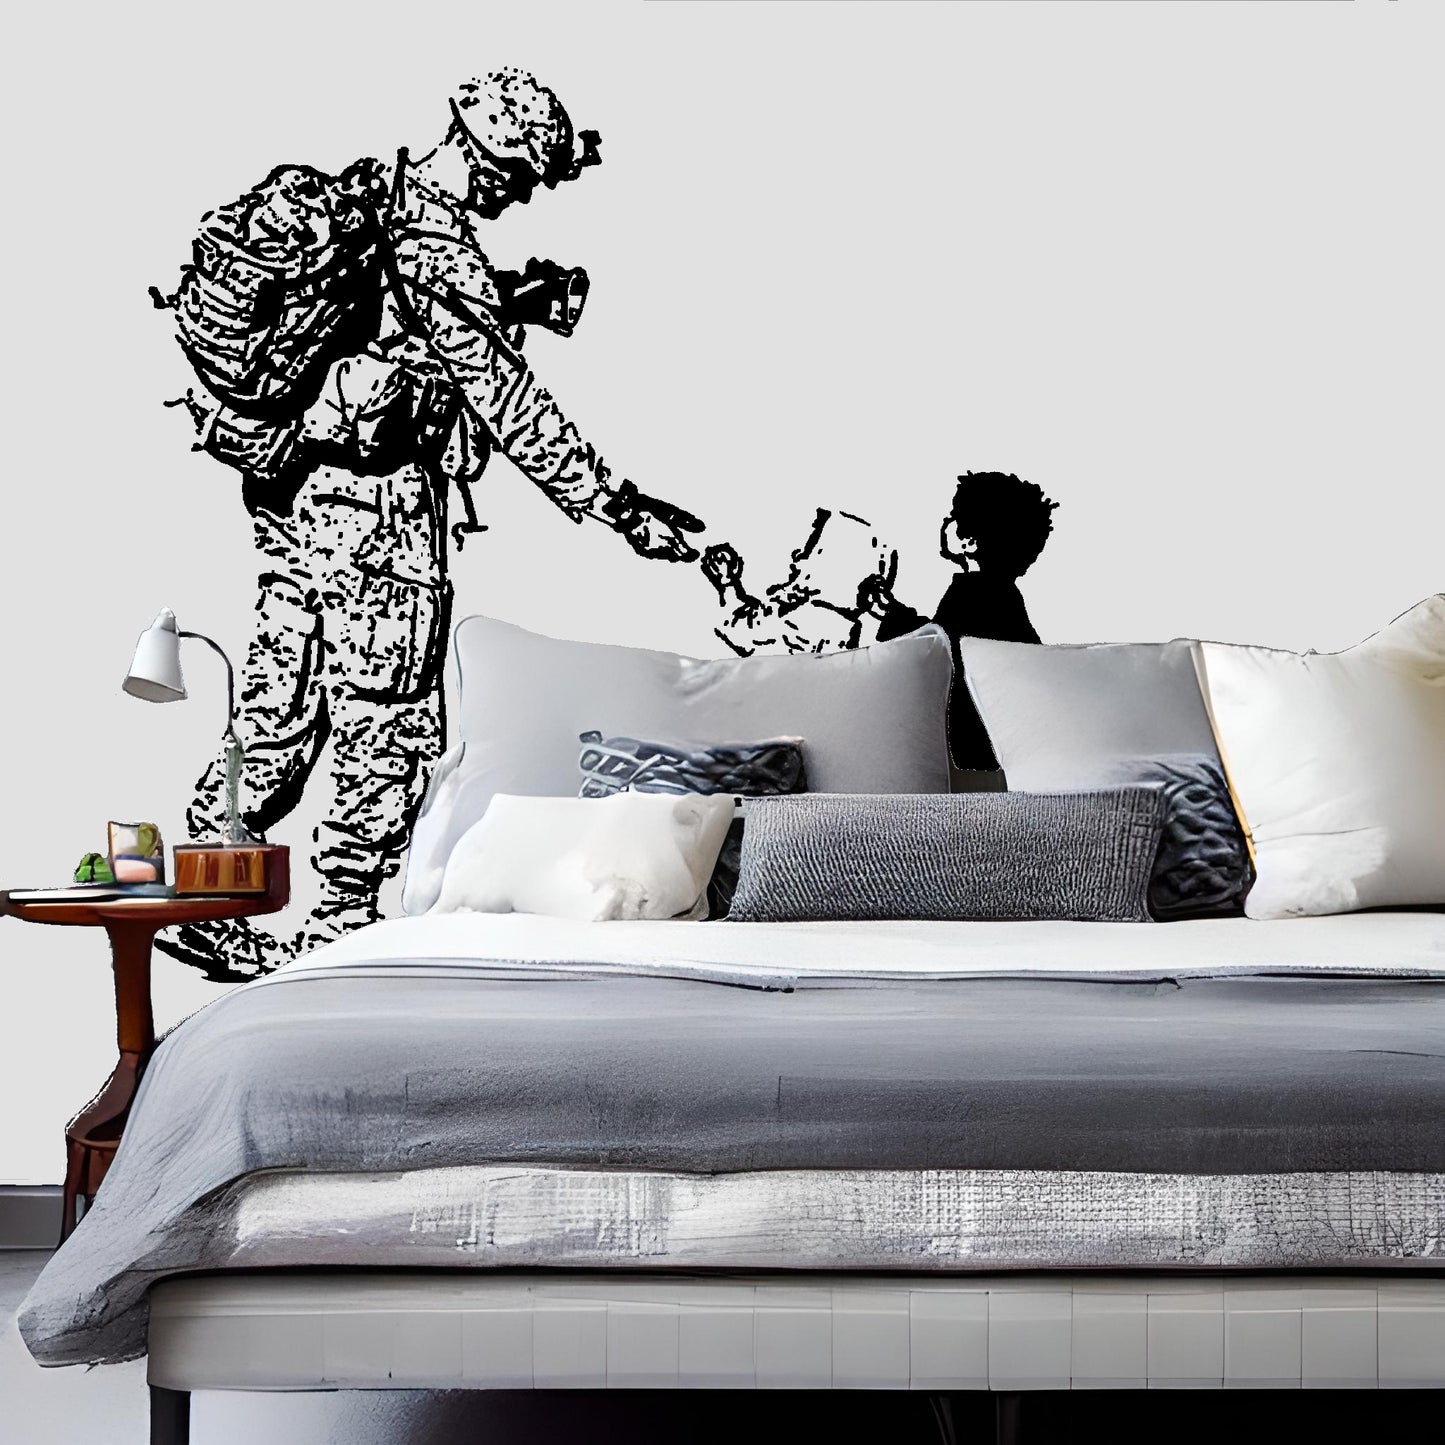 The Sympathetic Soldier Large Size Removable Stickers for Living Room Home Décor Vinyl Wall Stickers and Art Murals - 9 Foot Max